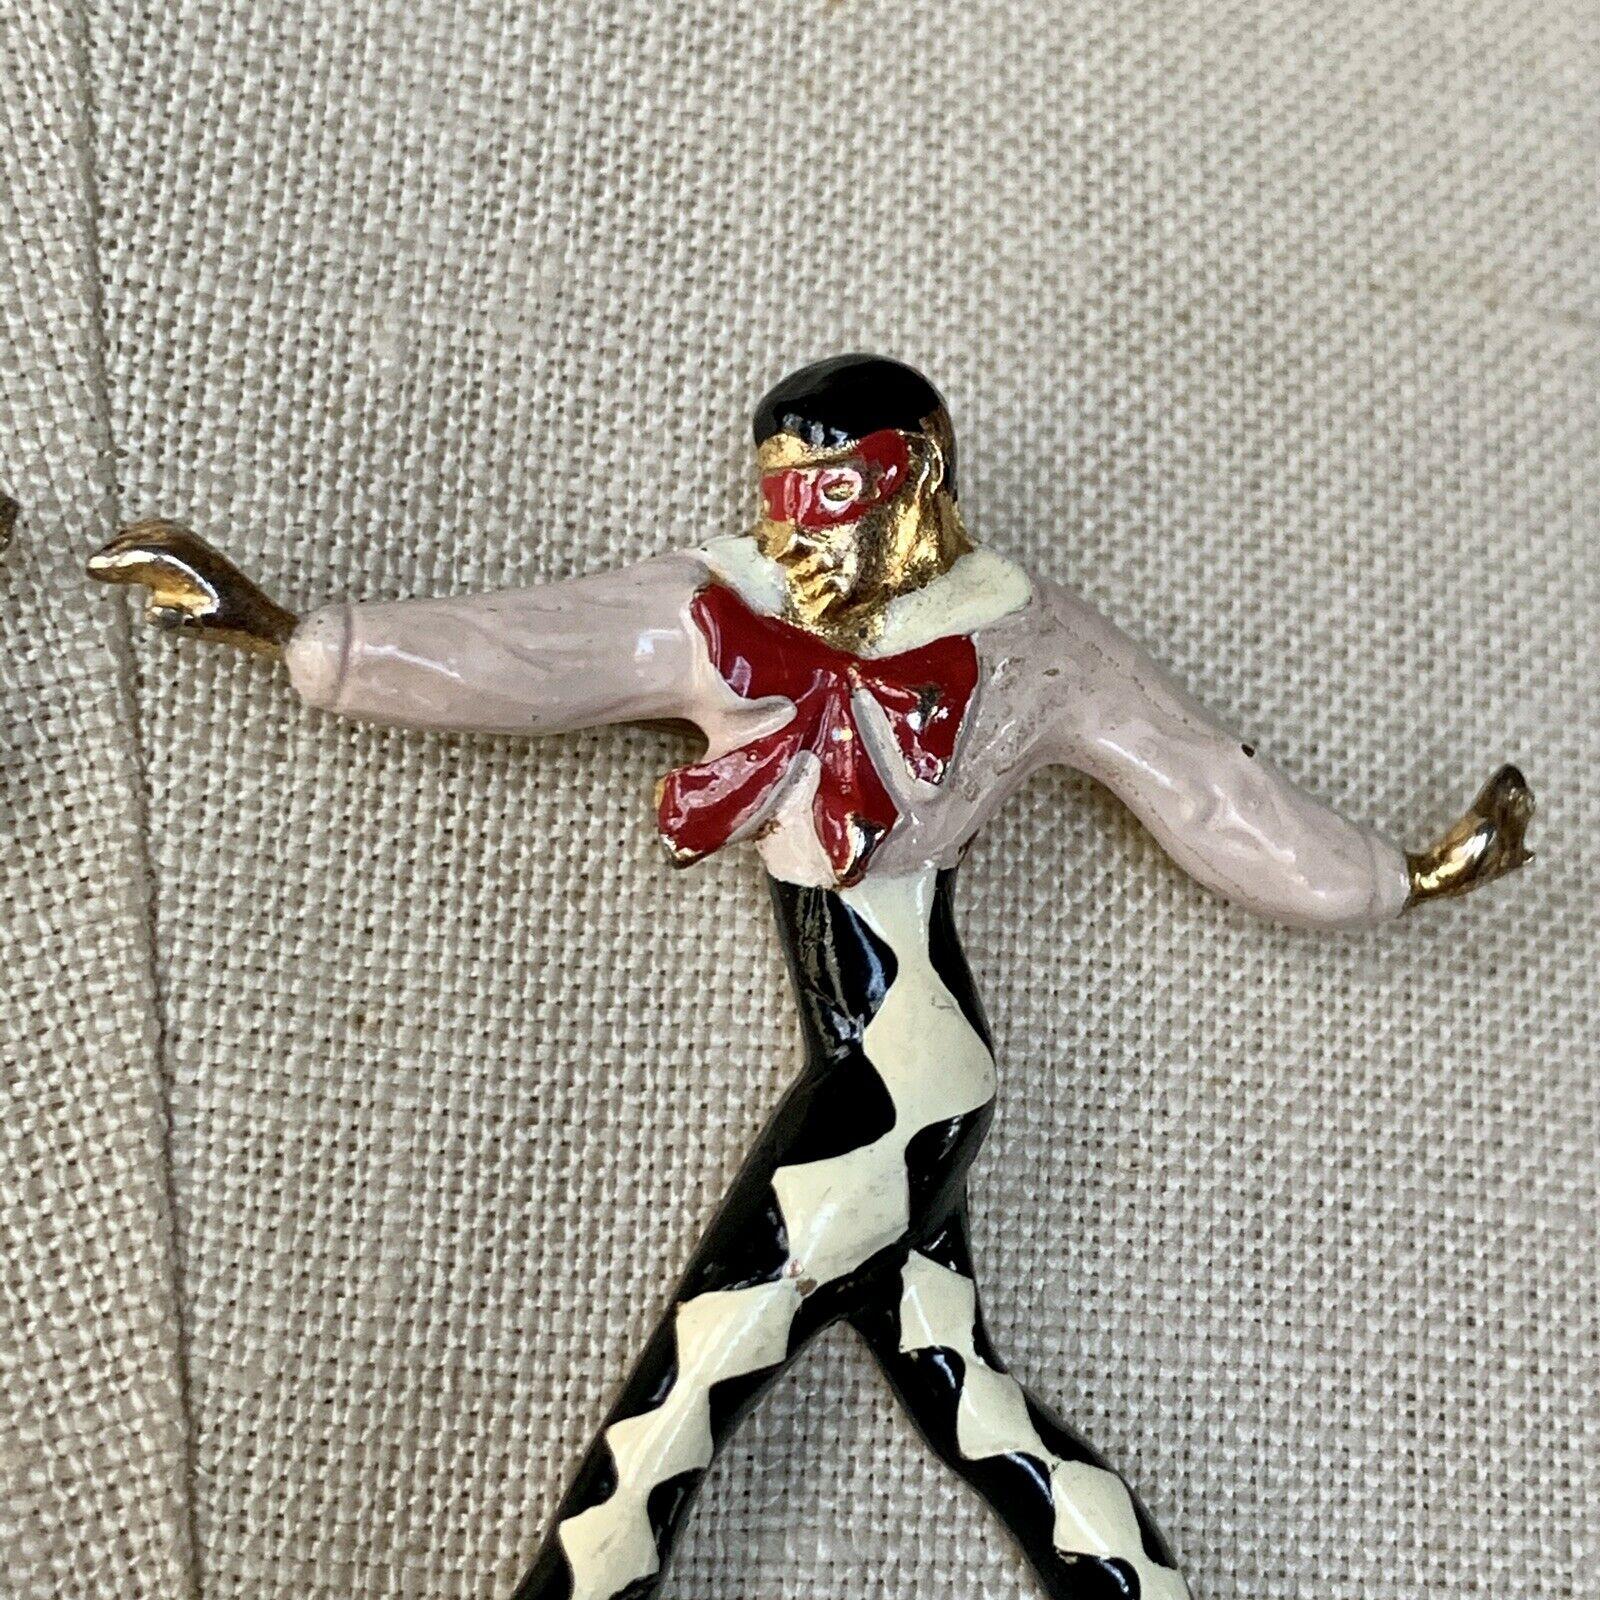 Silson, Pair of Harlequin Columbine Masked Ballet Dancers

Female gold plated base metal with pink, black, and white enamel. Harlequin in a black and white leotard and fancy pink shirt with a big red bow, all in enamel. 

The hallmark 